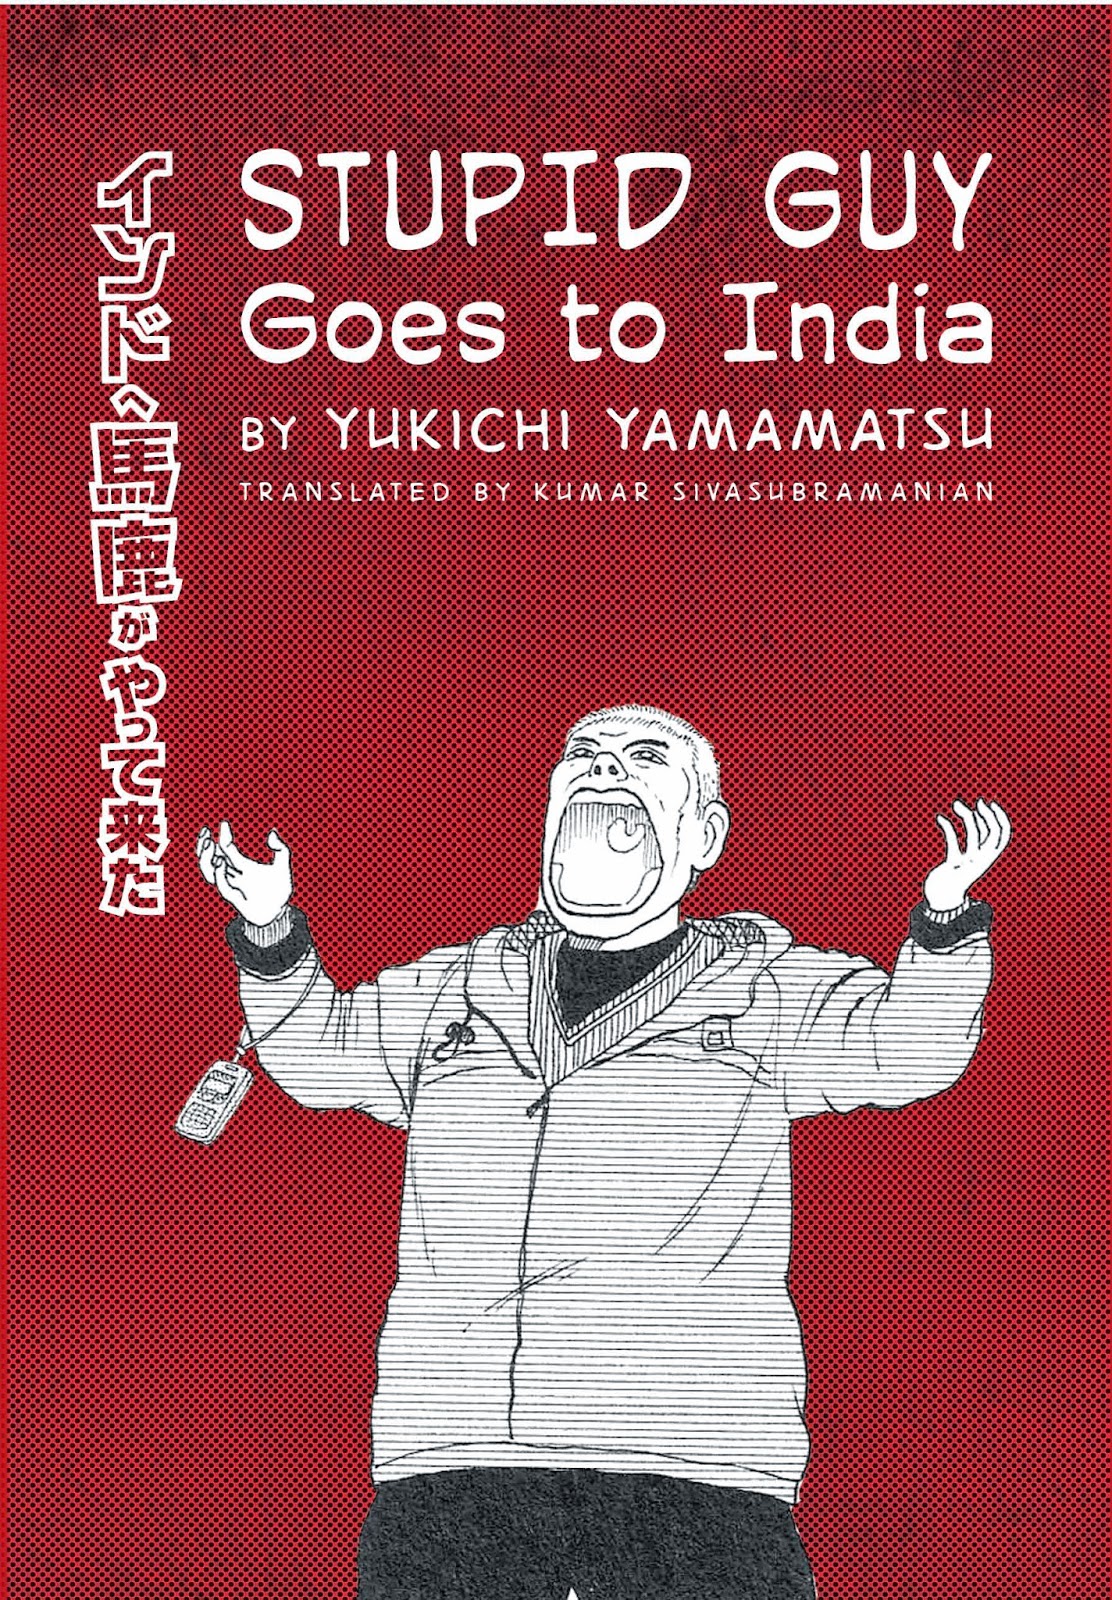 http://www.spdbooks.org/Producte/9789381626399/stupid-guy-goes-to-india.aspx